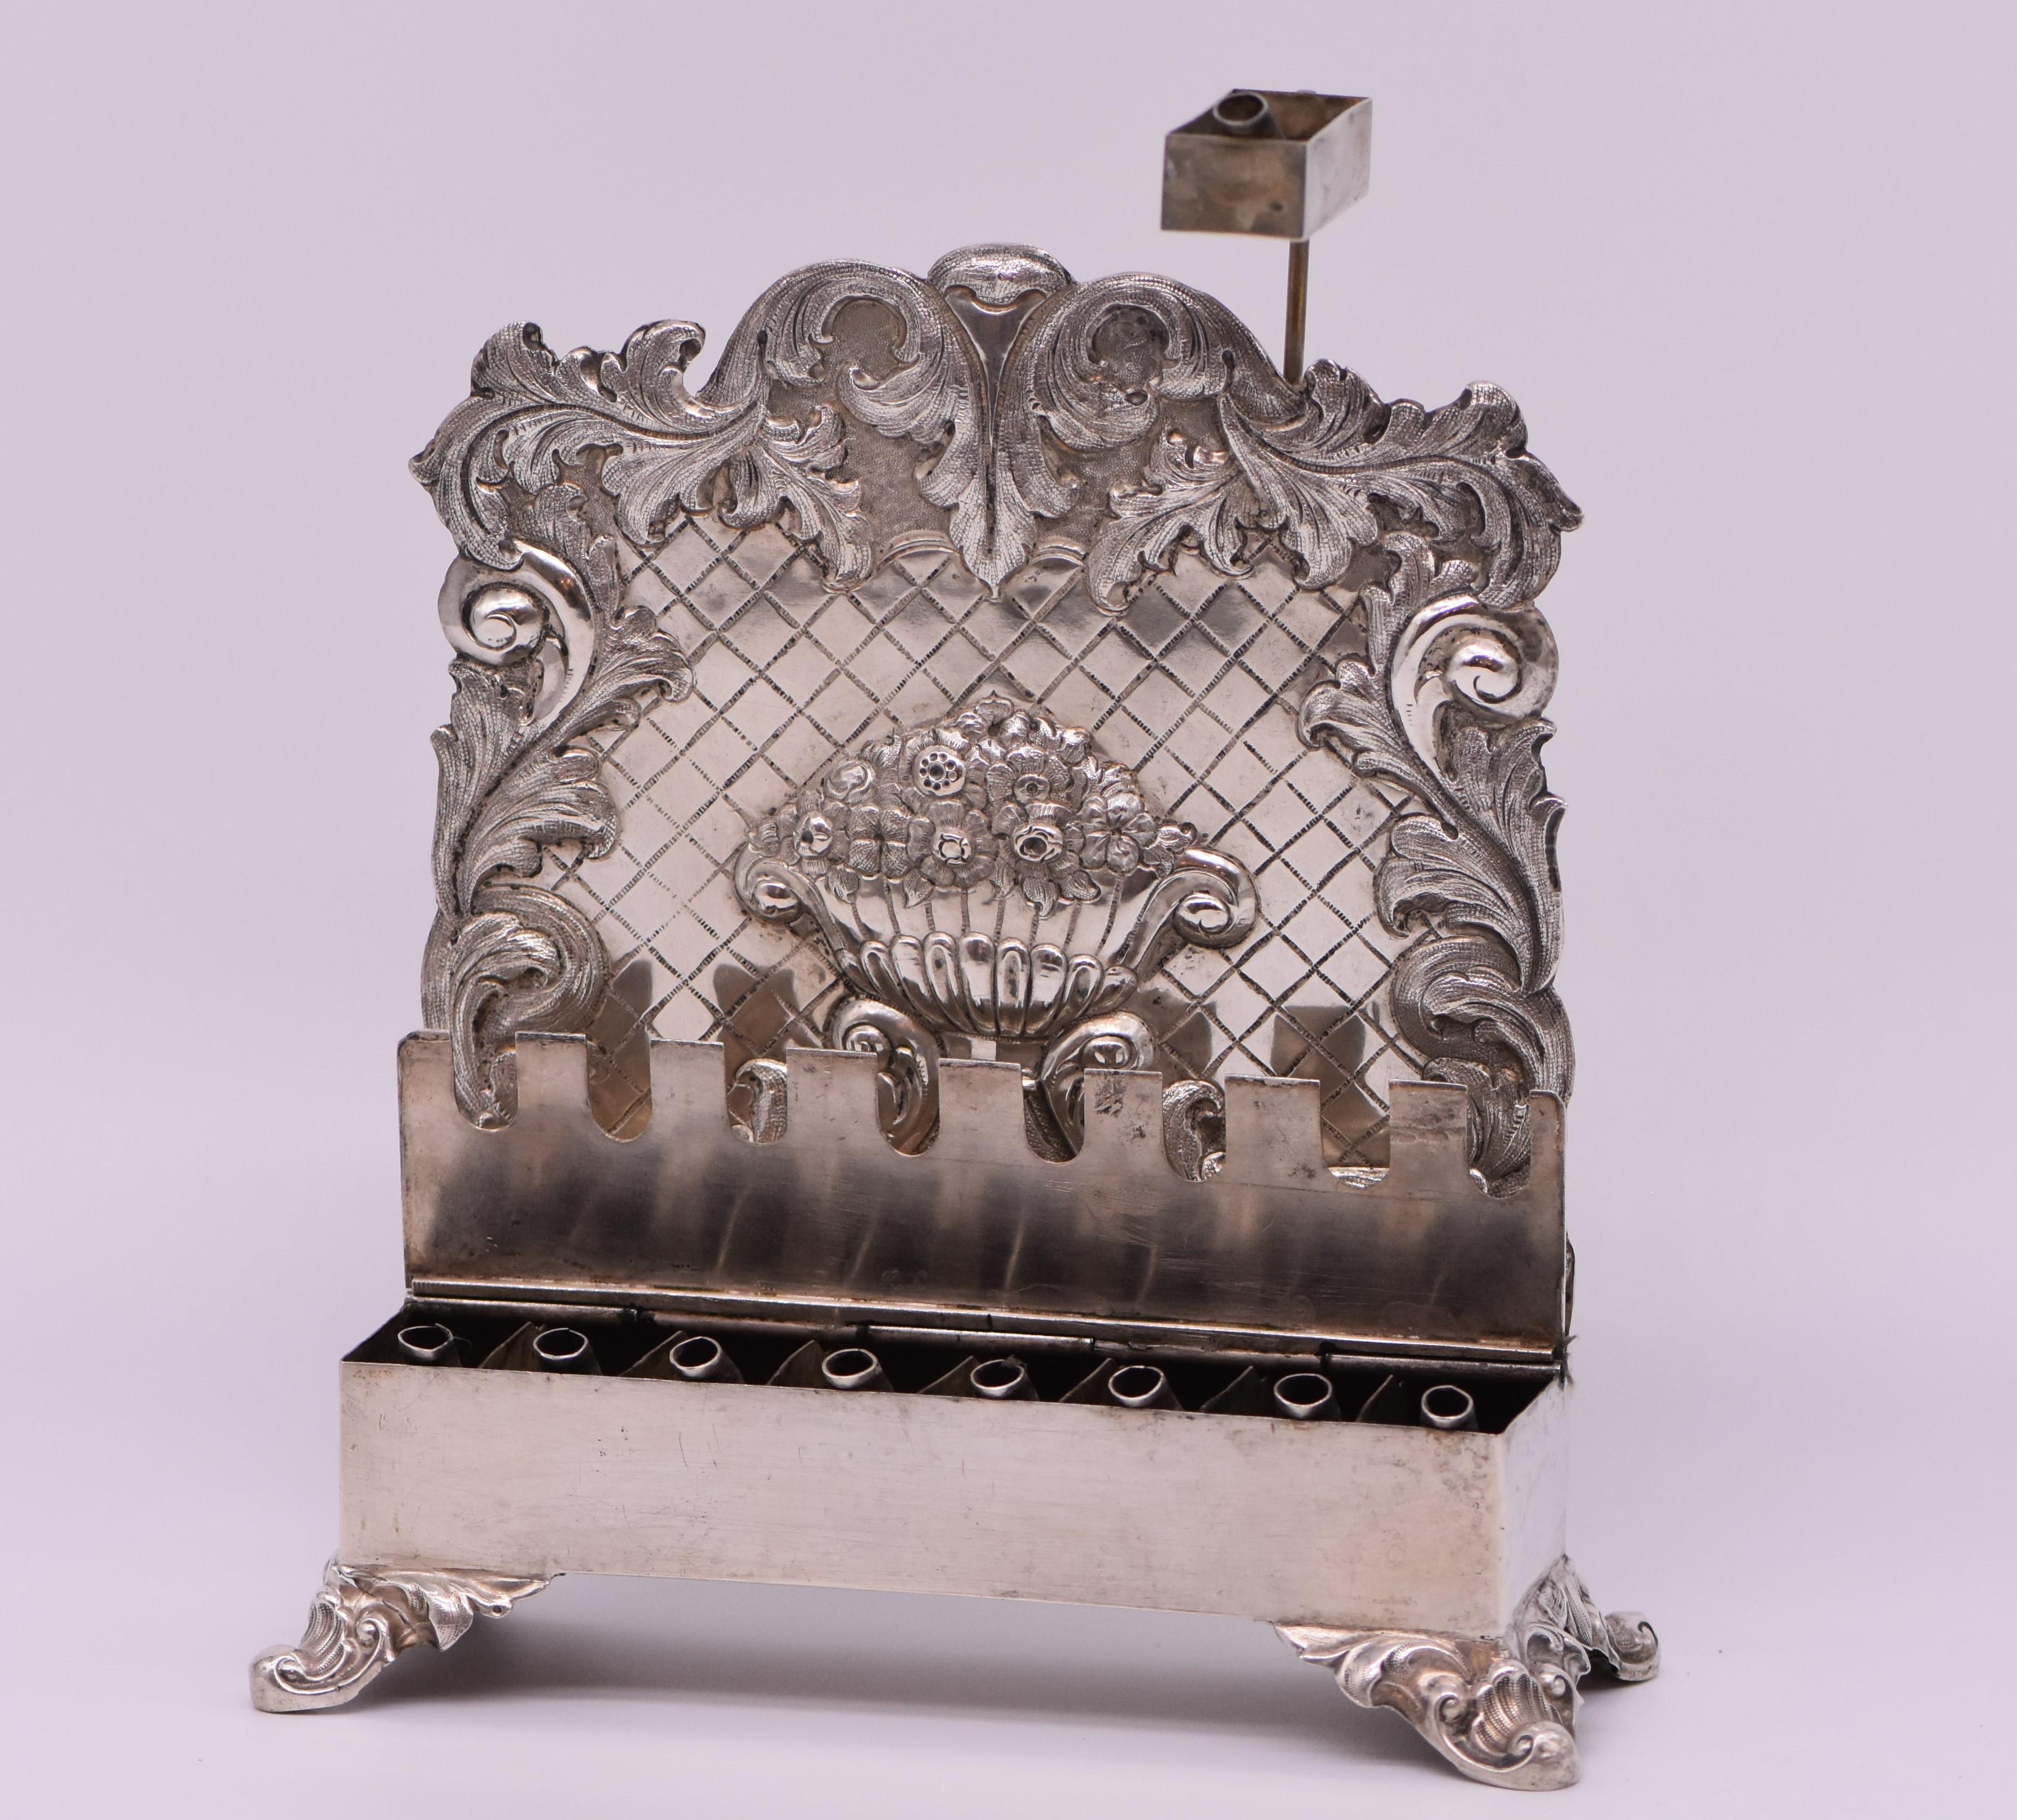 German silver Hanukkah lamp, marker's mark L.S. incuse, berlin, 1847-50. Seen in bench form with covered lamps, on shell and scroll feet. The backplate chased with an urn of flowers on trellis ground within embossed leaf border marked on the